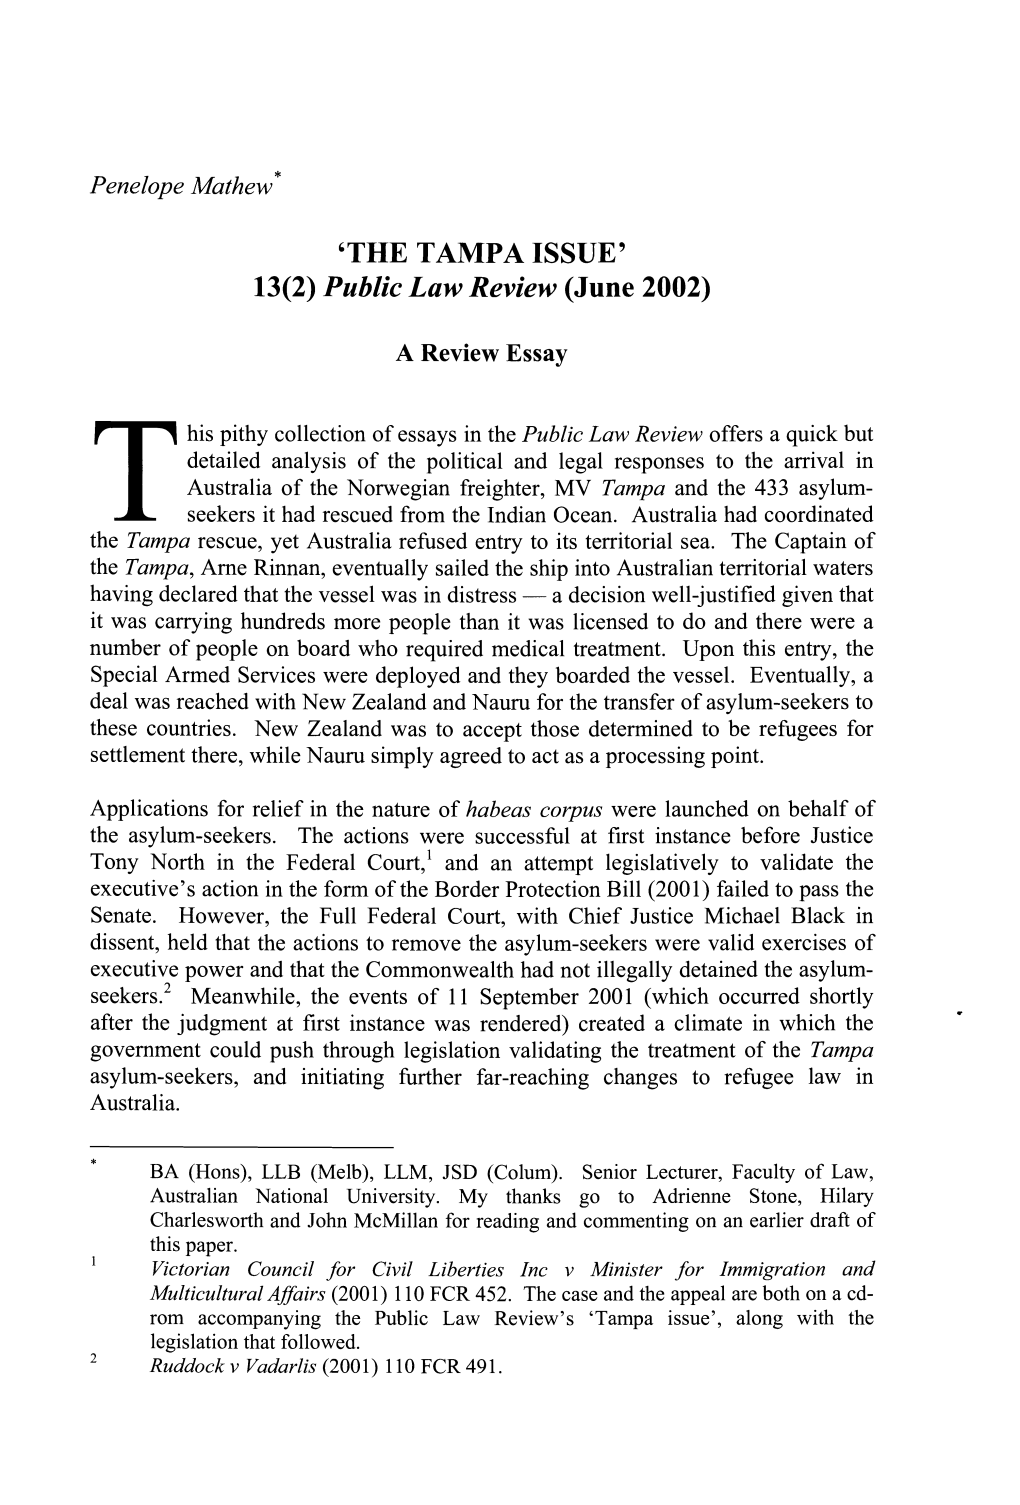 'THE TAMPA ISSUE' 13(2) Public Law Review (June 2002)